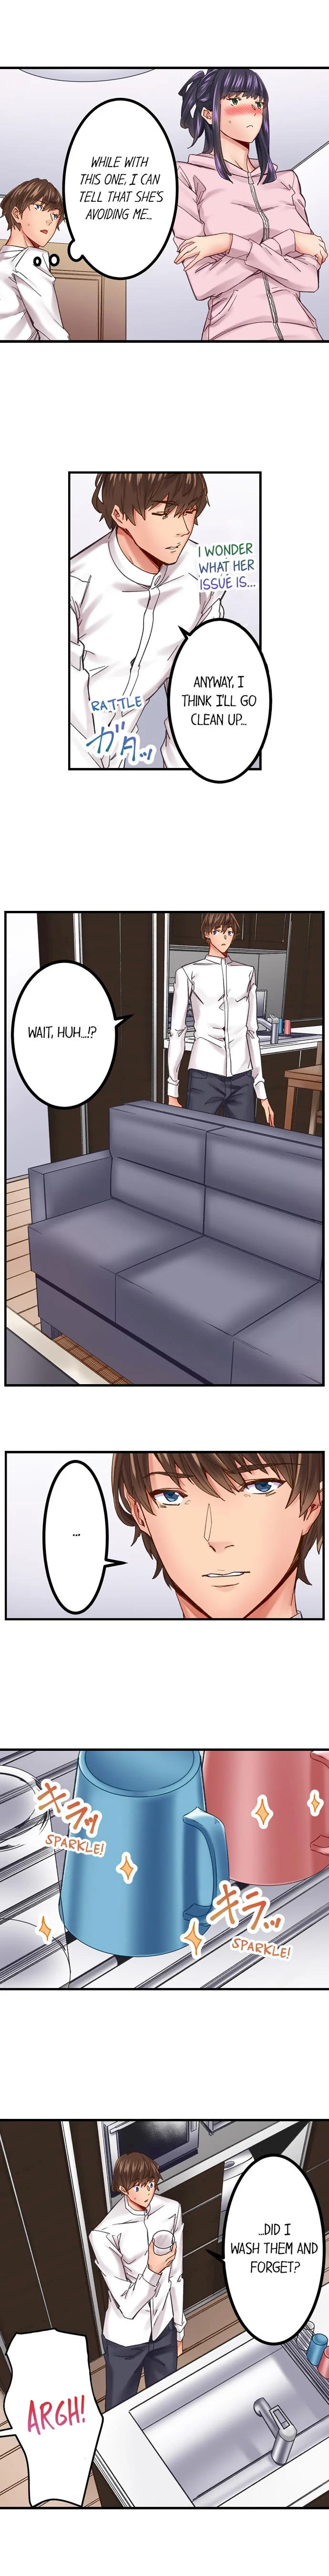 The Share House’s Secret Rule - Chapter 7 Page 5